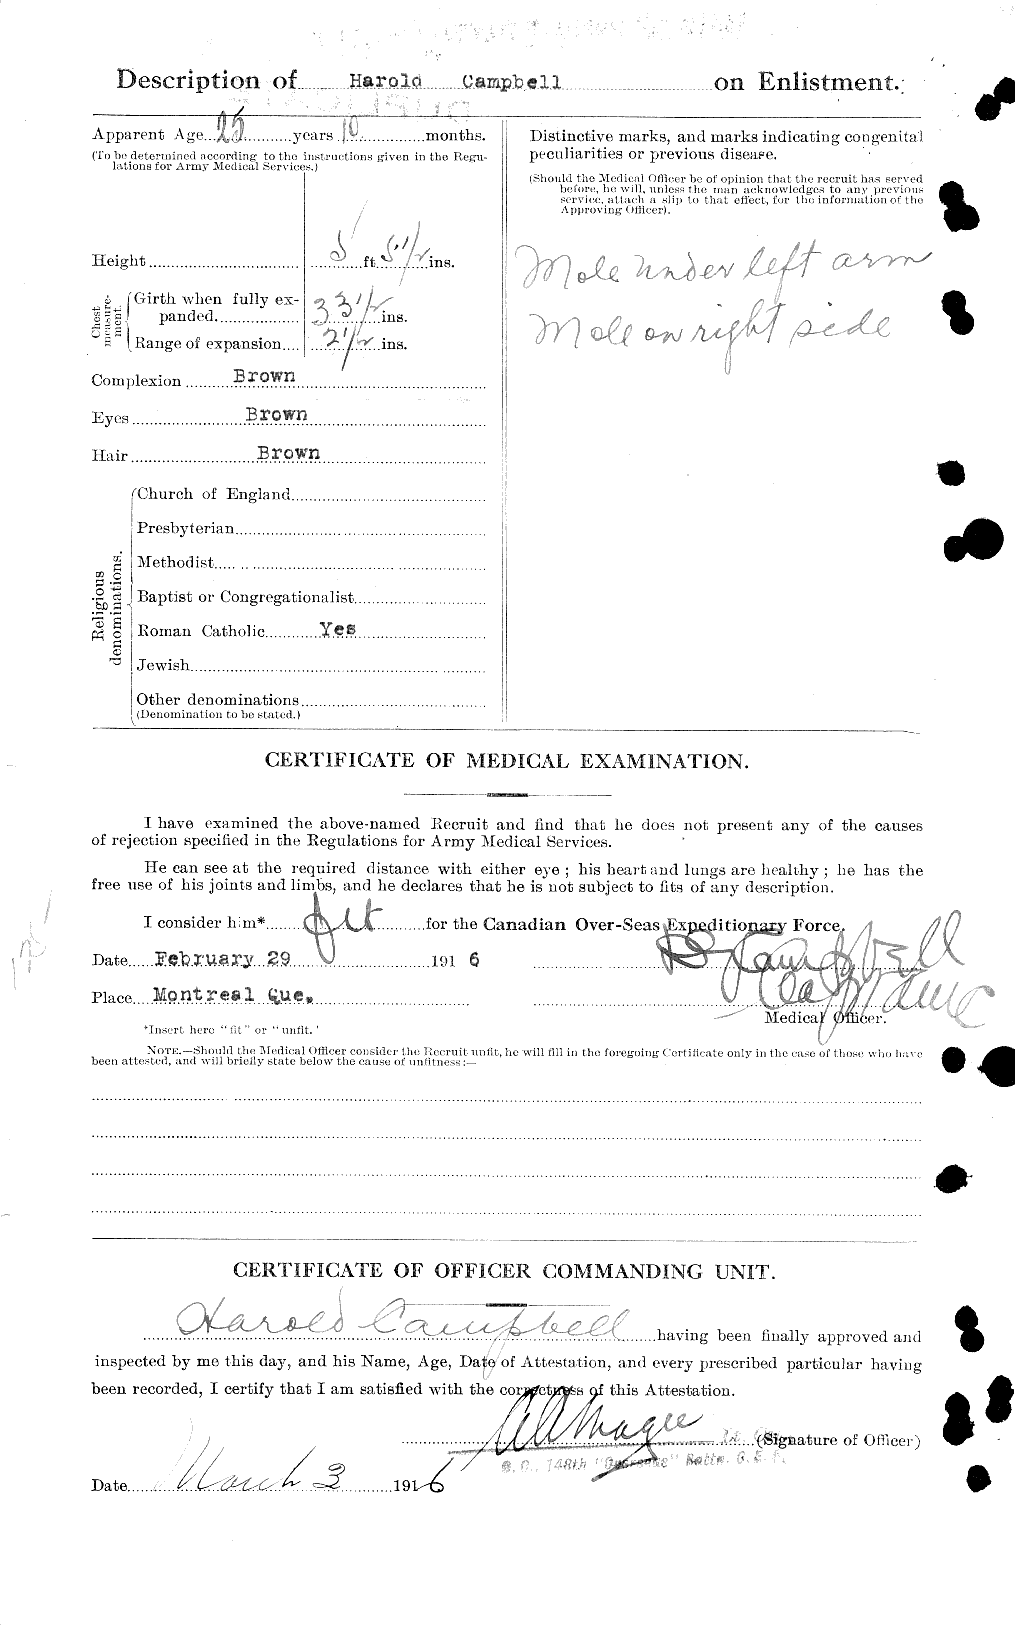 Personnel Records of the First World War - CEF 008362b